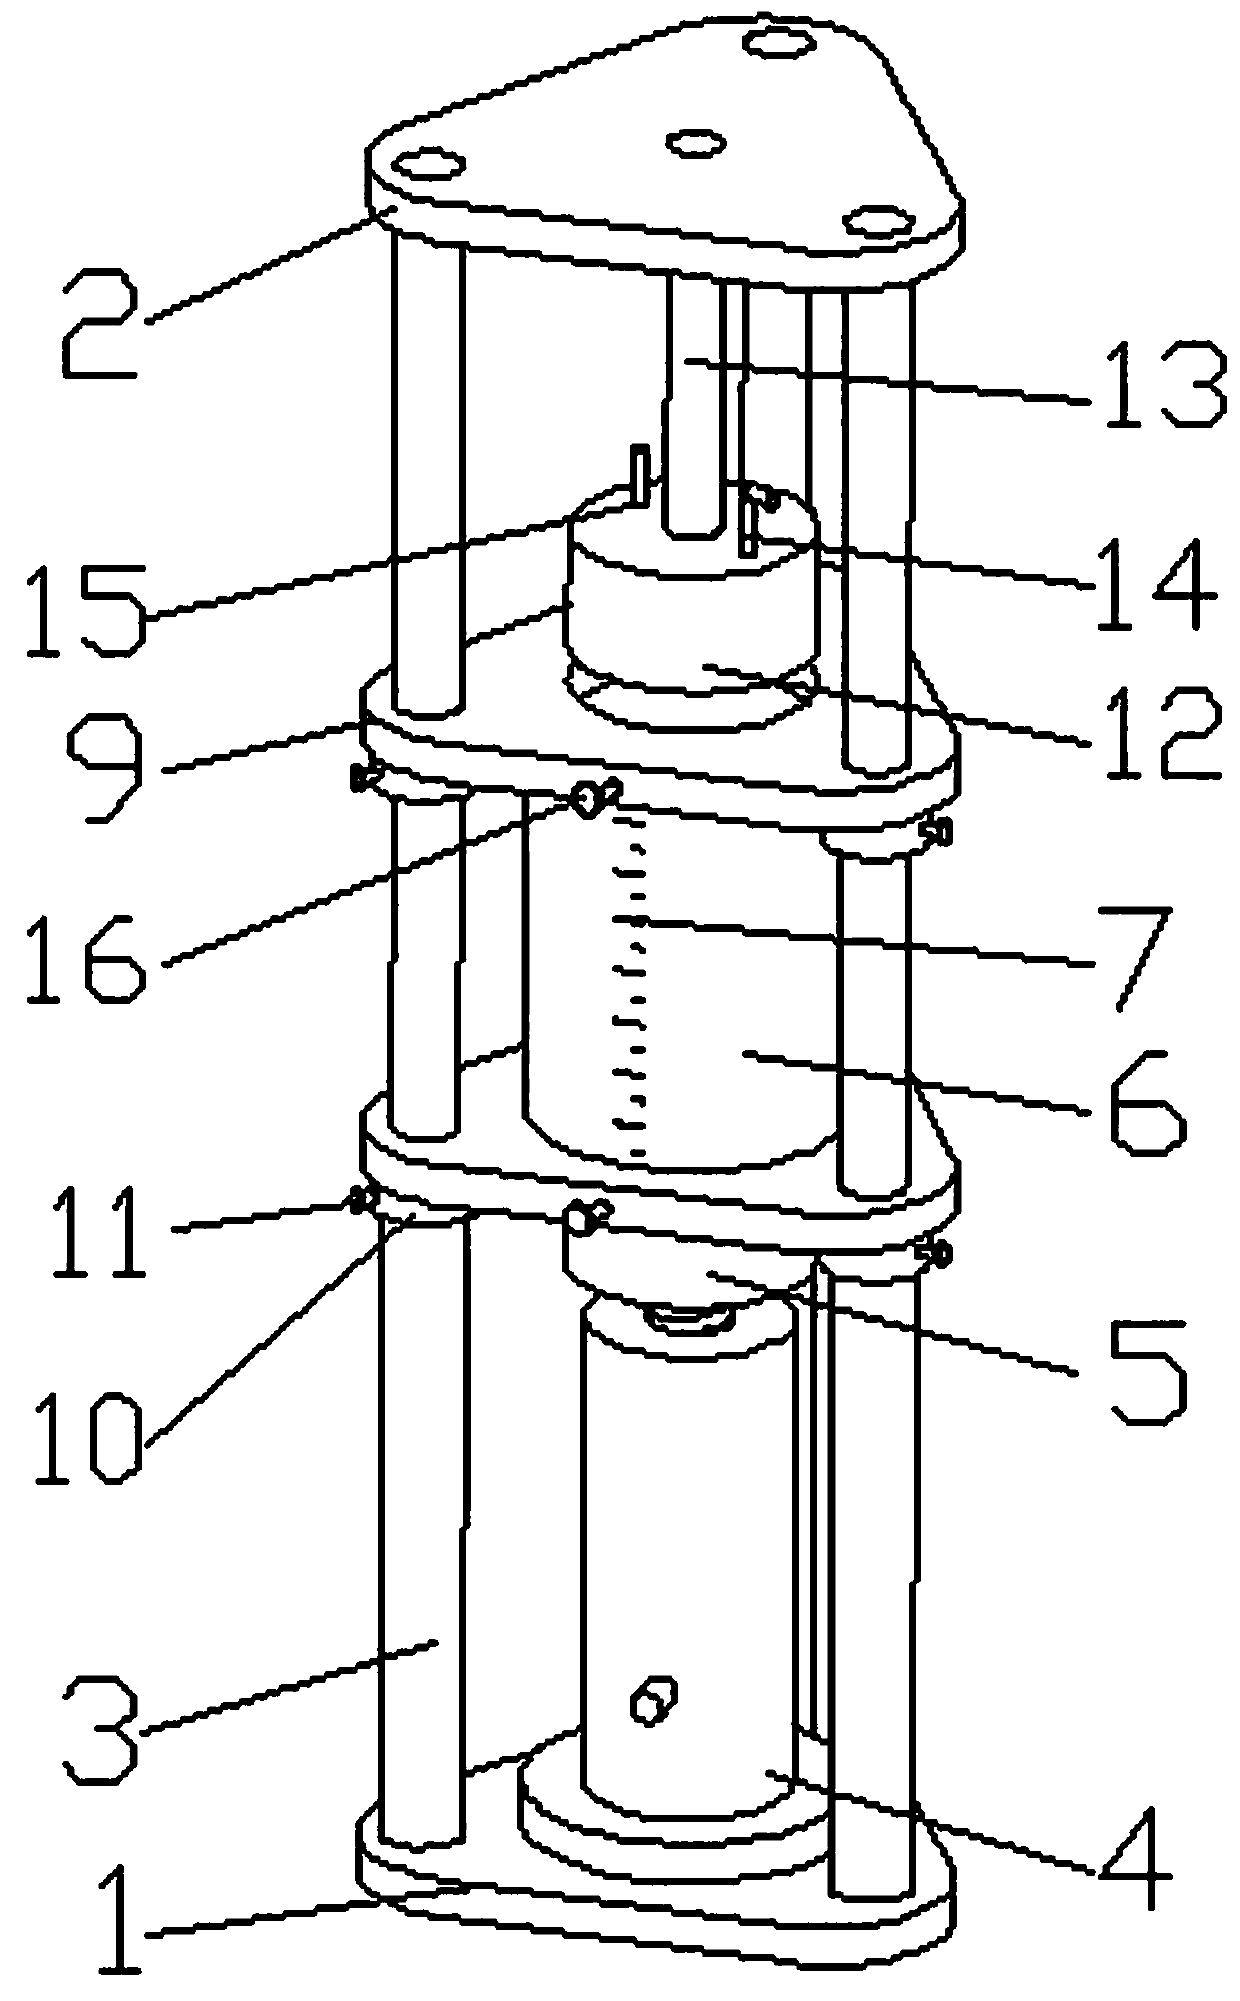 Test device and method for measuring void ratio of stone chippings test sample and controlling void ratio of stone chippings test sample